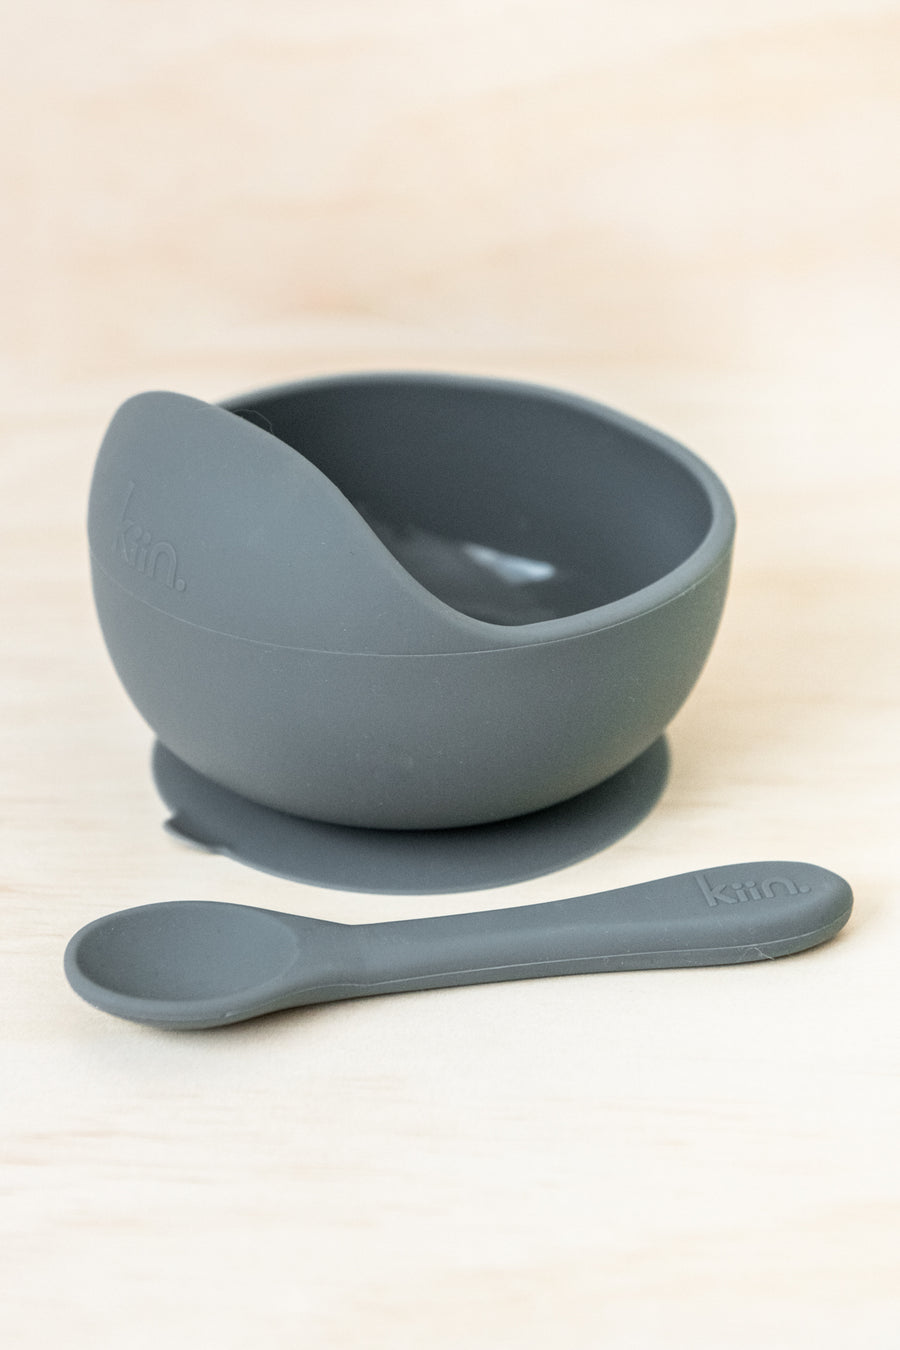 Kiin Silicone Suction Bowl and Spoon Set